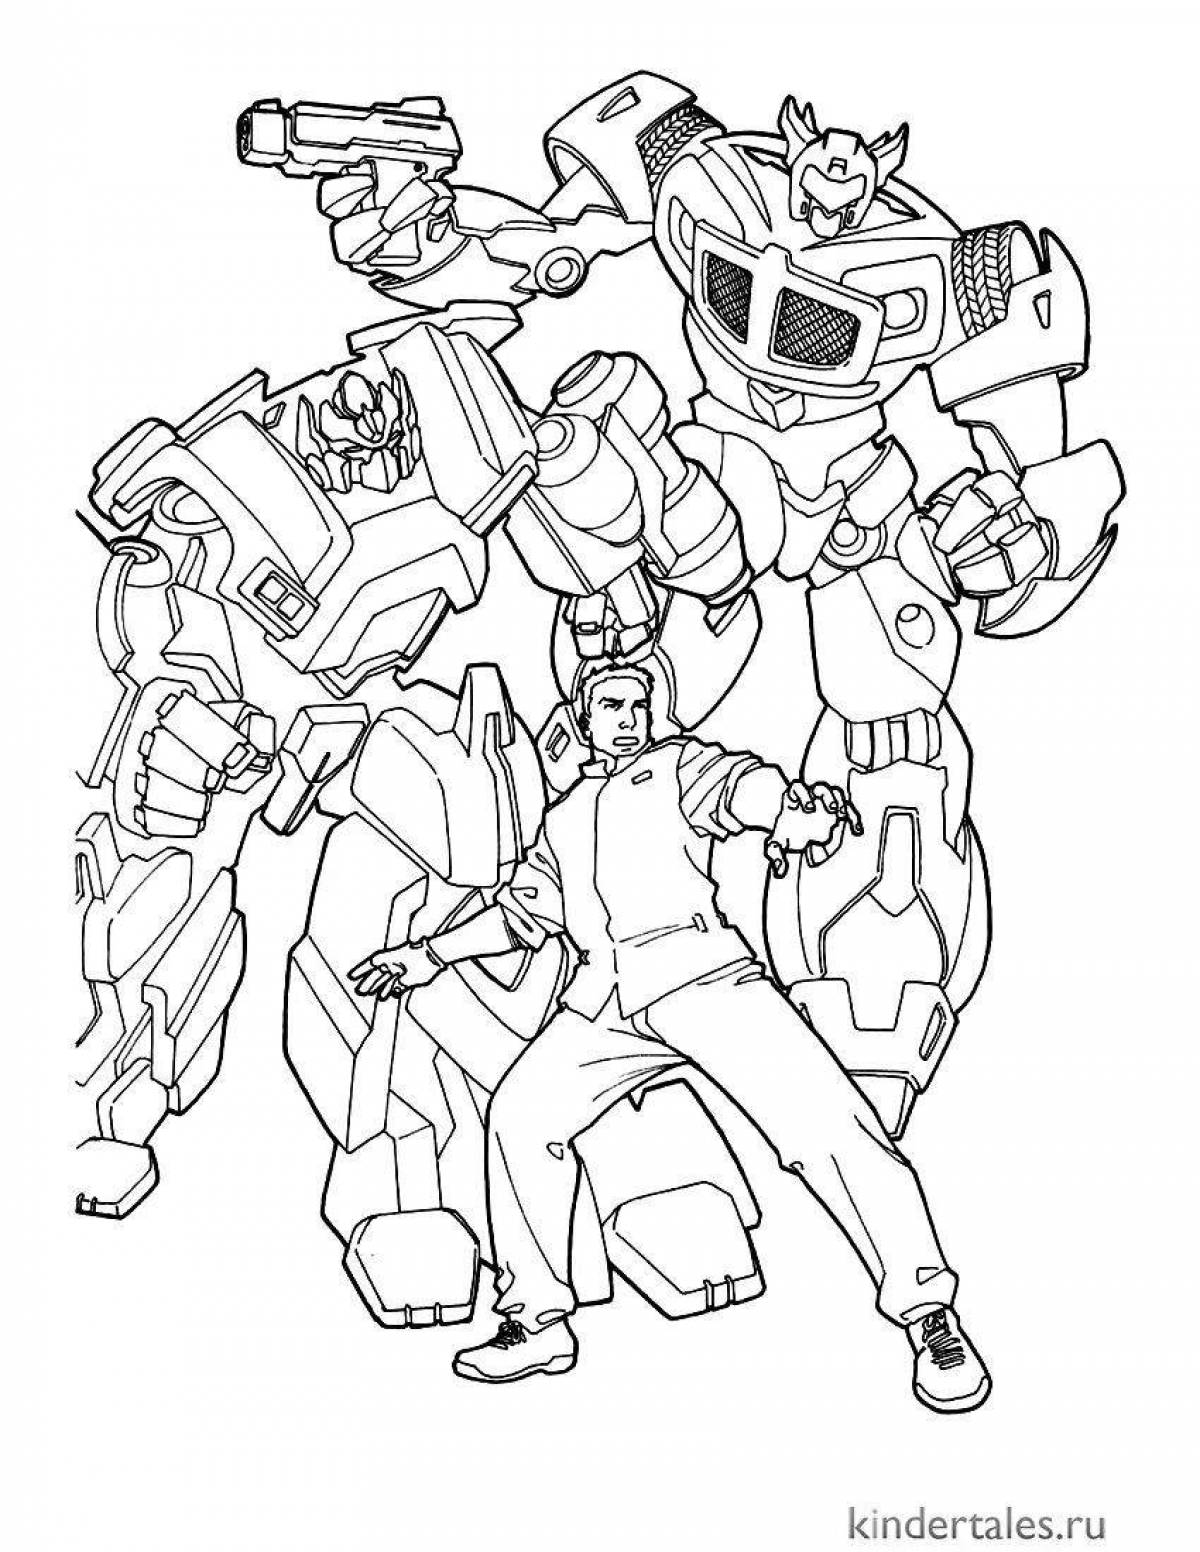 Great transformers coloring book for 6-7 year olds